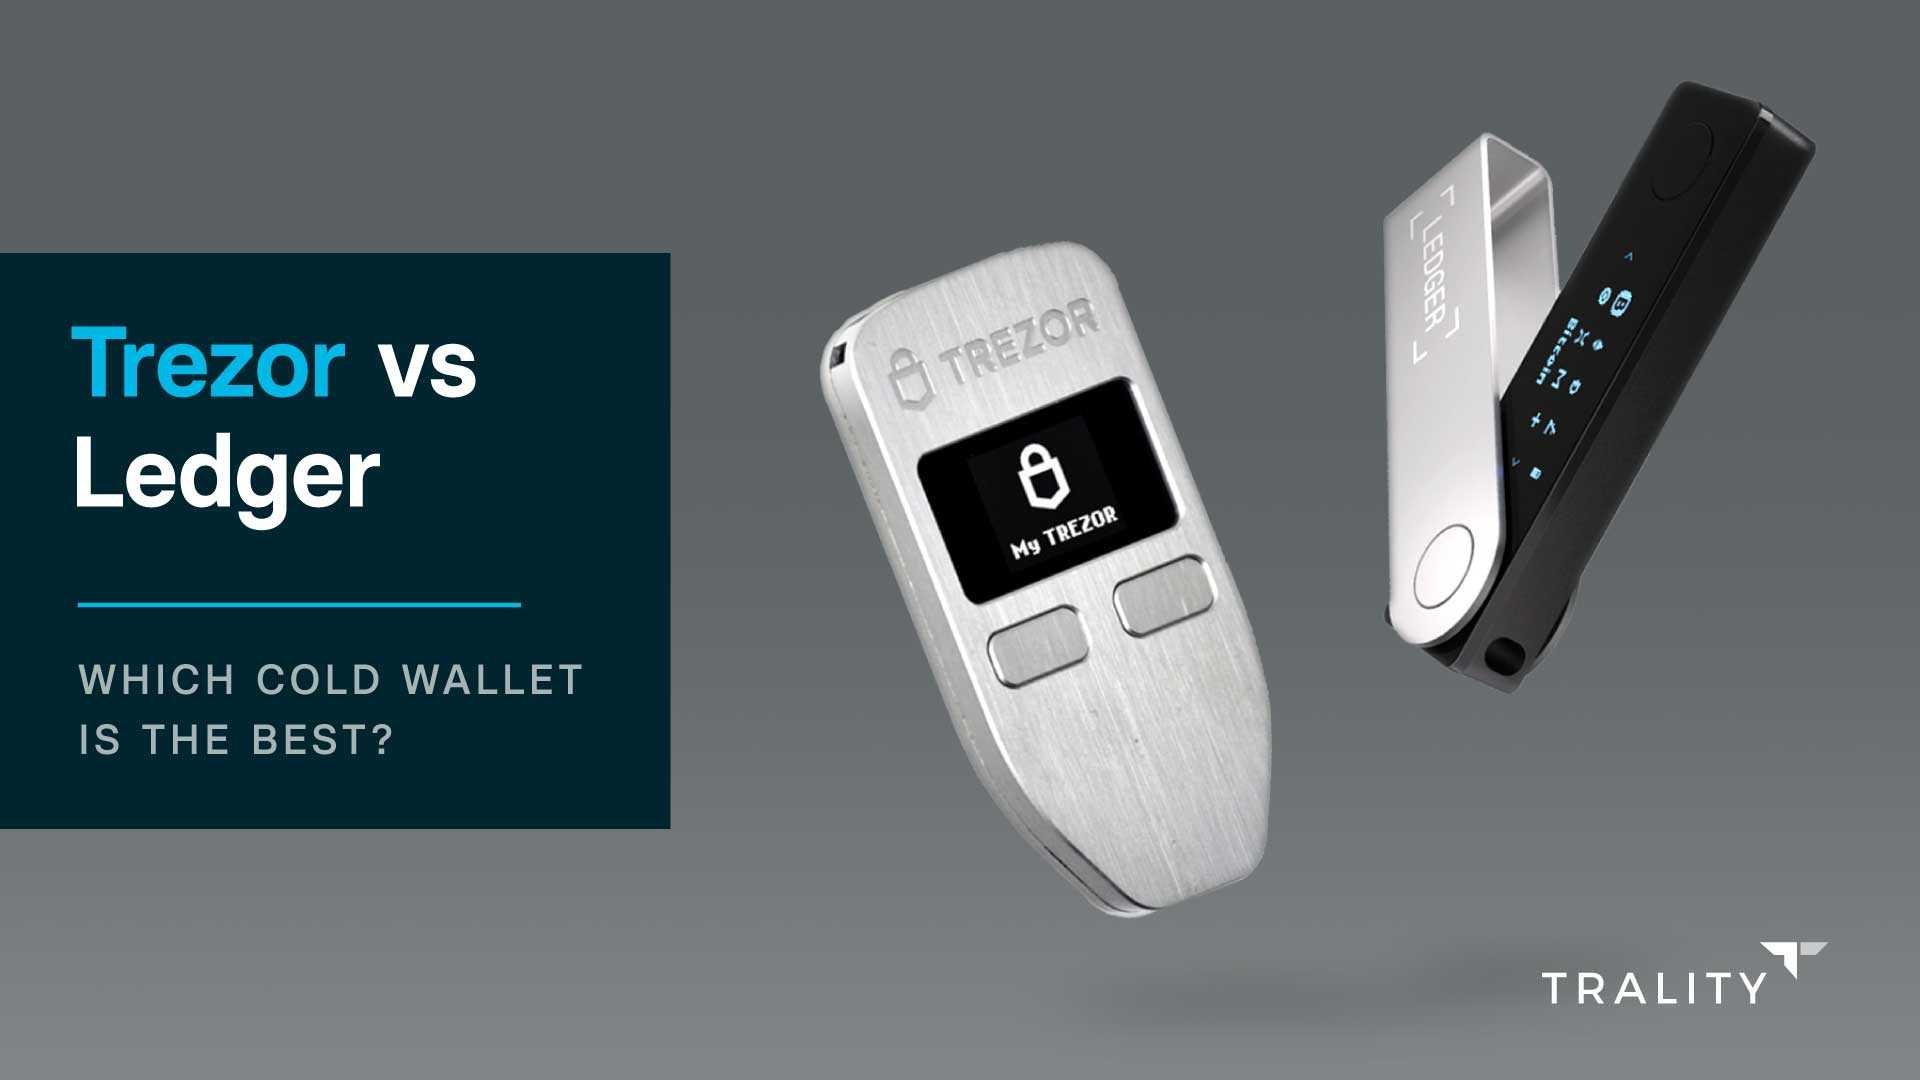 TREZOR vs Ledger Nano S: Which is the Best Crypto Wallet? ()